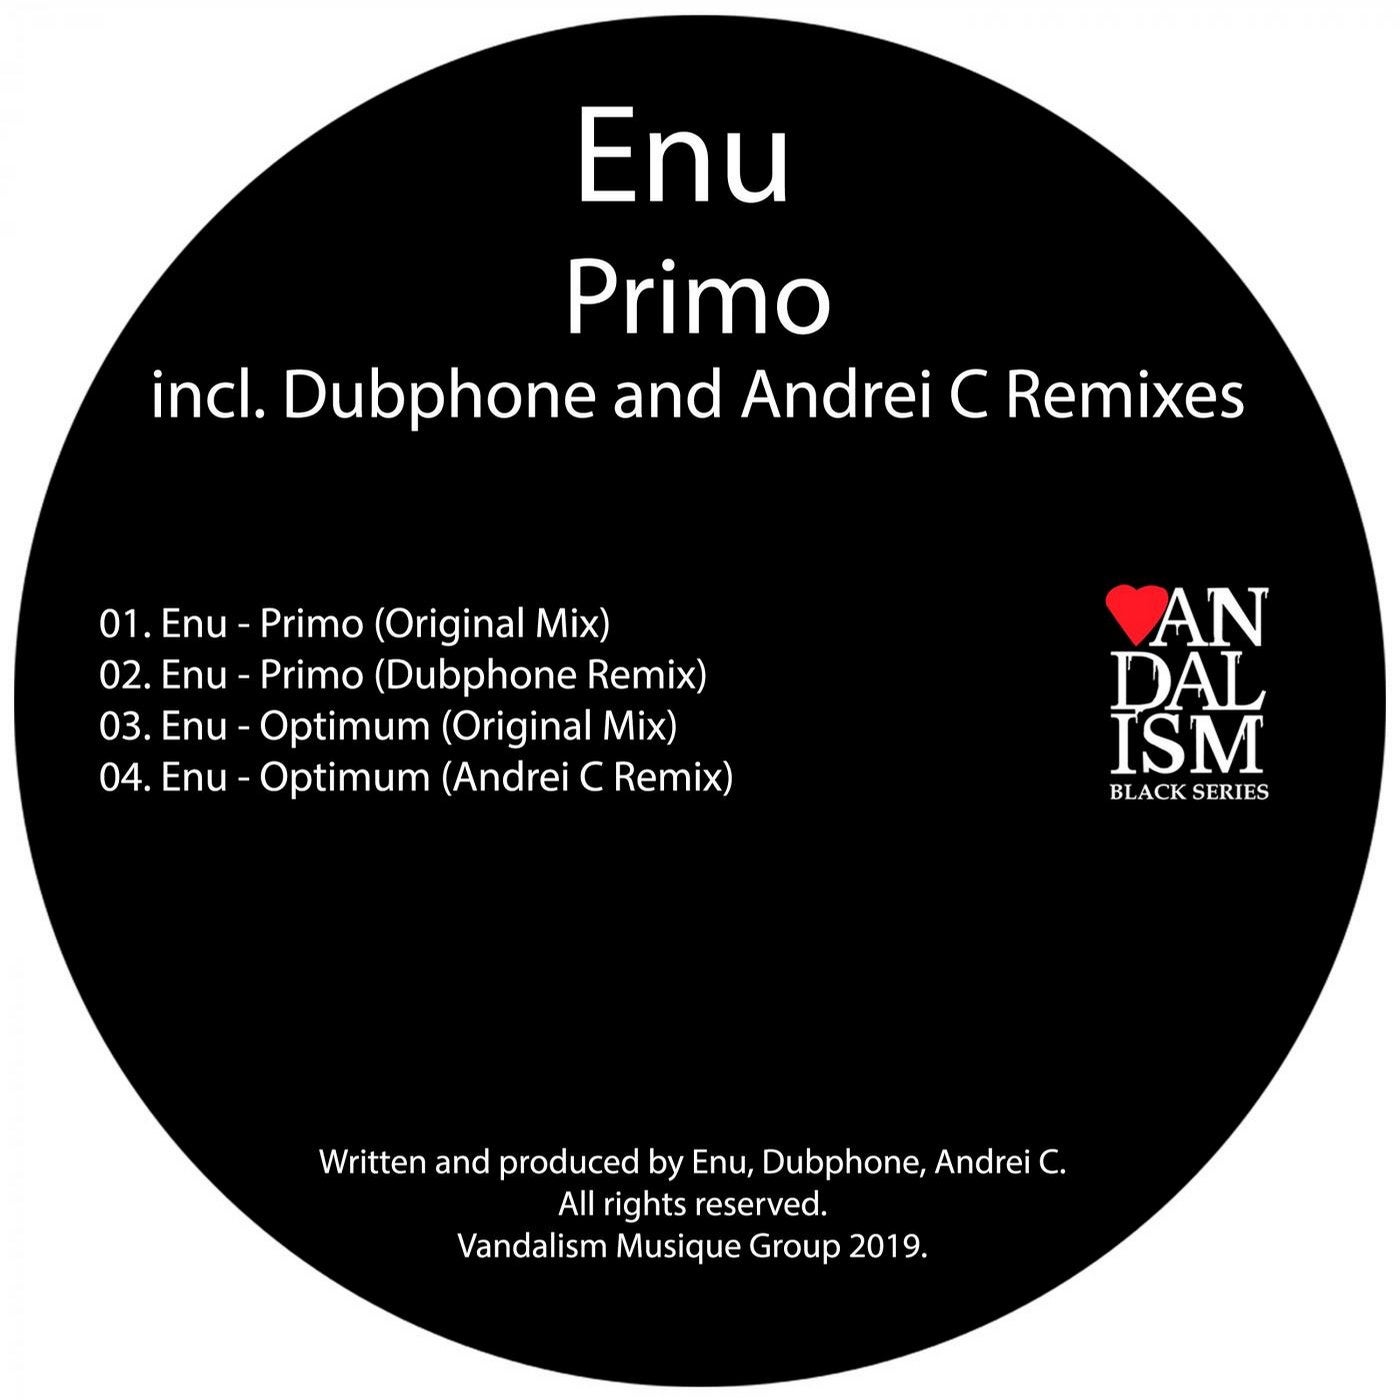 Primo incl. Dubphone and Andrei C Remixes